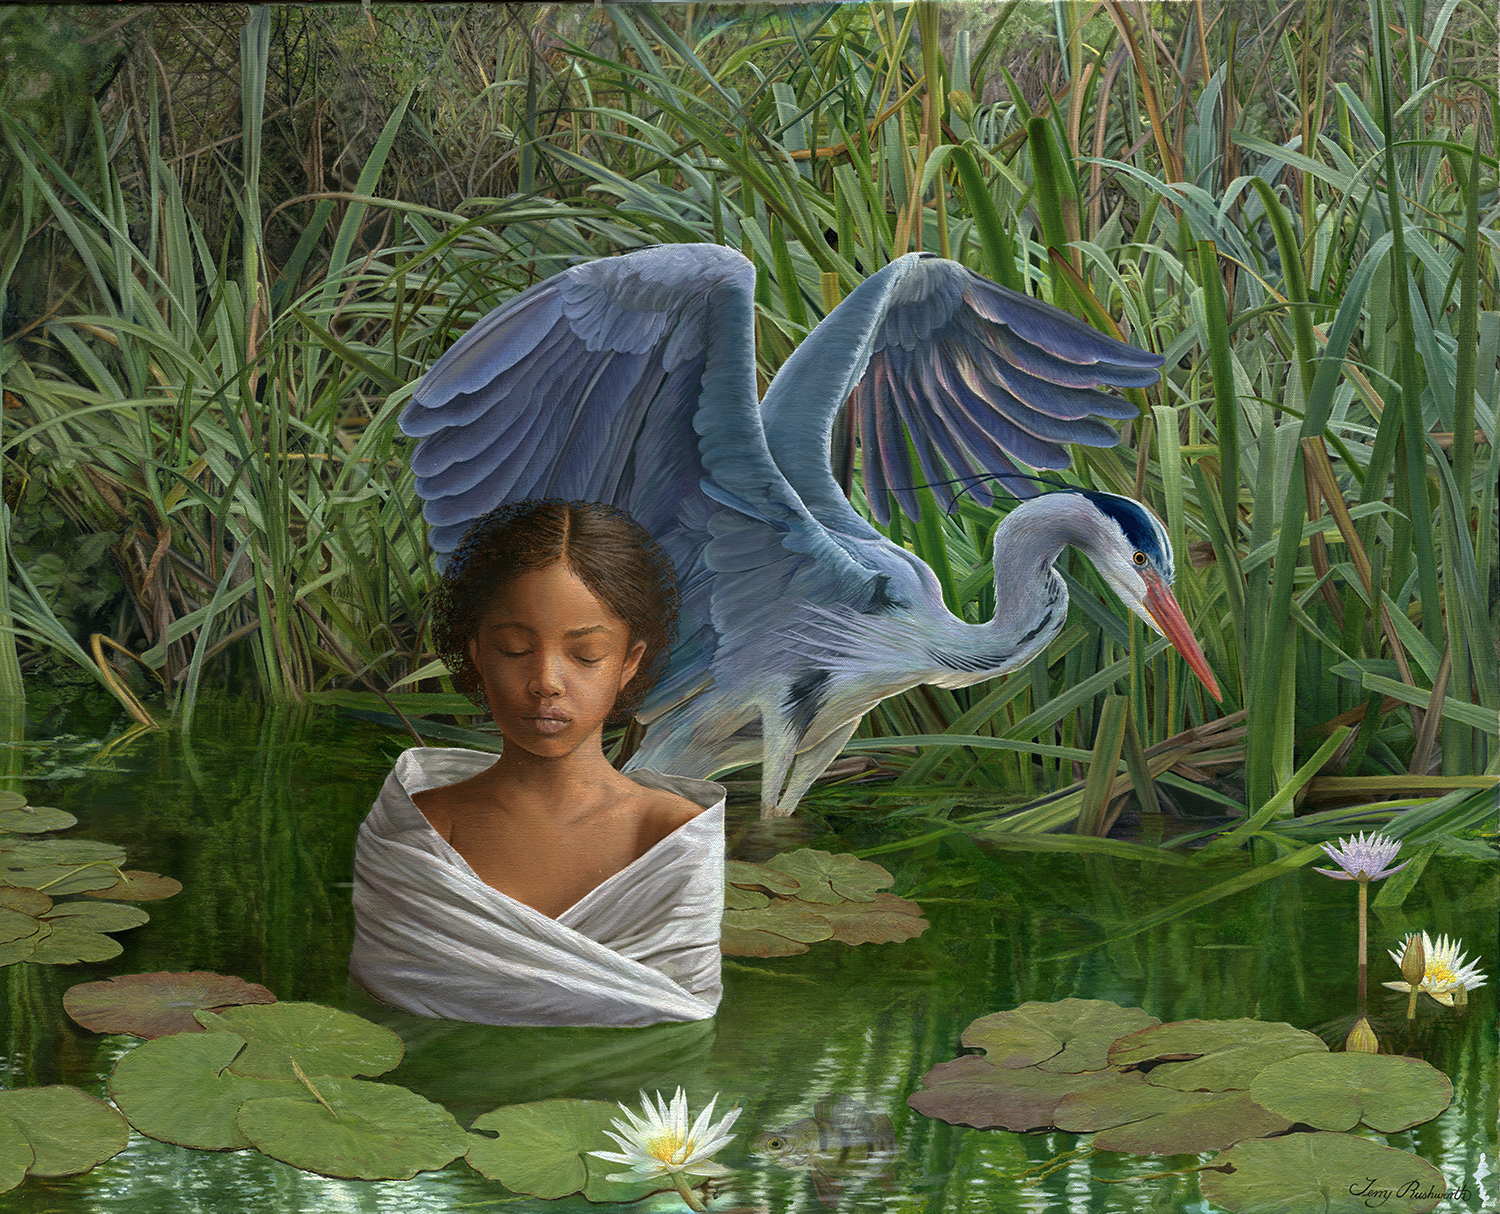 THE GIRL AND THE HERON